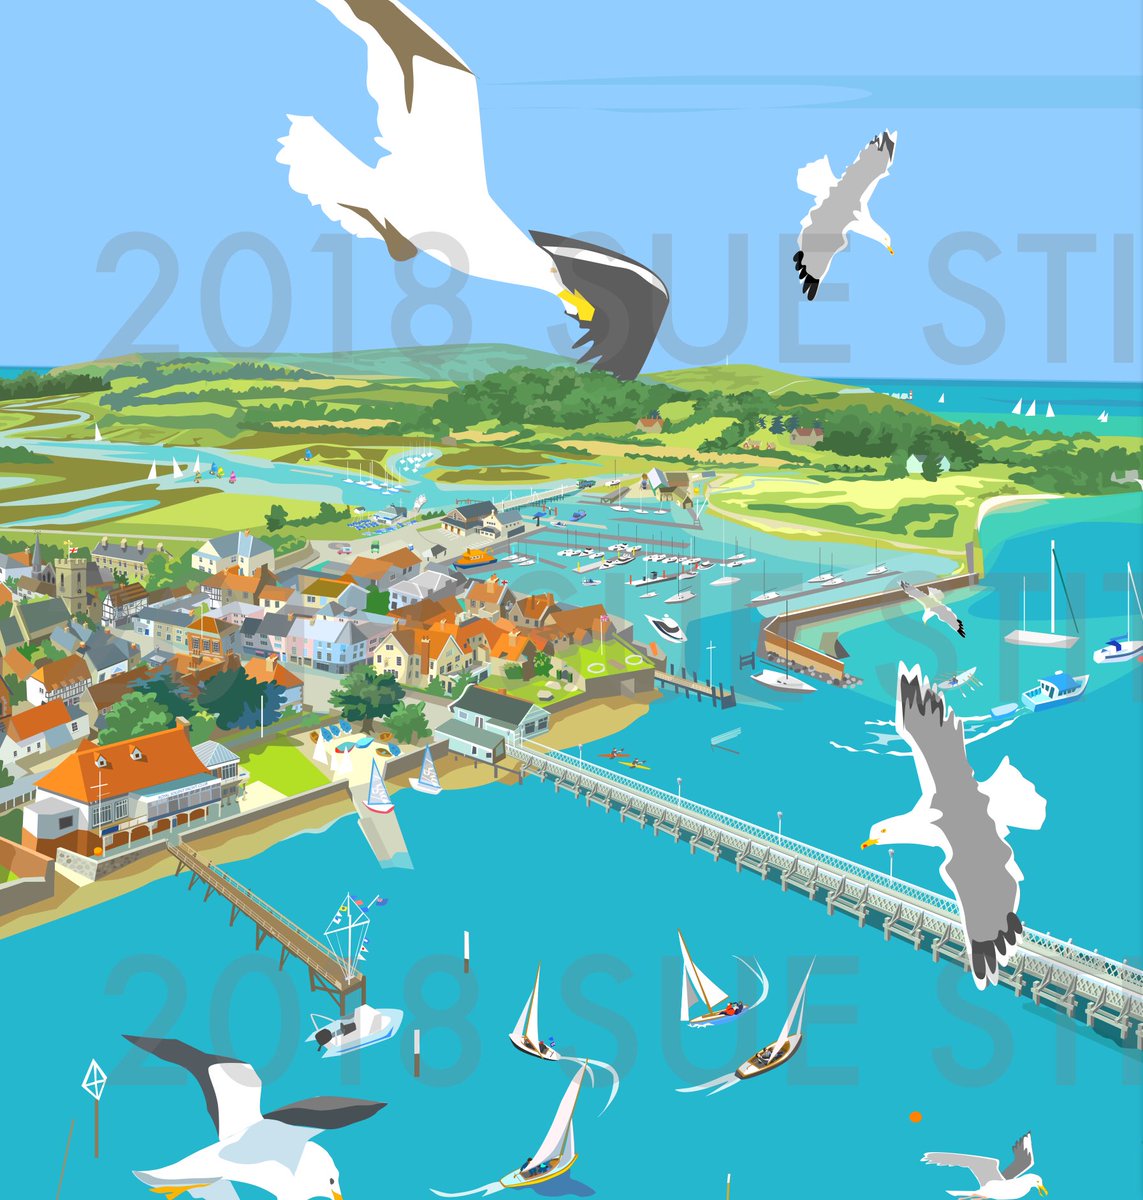 Trying to tame the seagull and finish this before Yarmouth Harbours Spring Festival on Saturday #suesstitt.com #seagulls #springfestival #isleofwight #sailingsolent #southcoastevents #retroposters #saturday5may2018 #ipadart #digitalprints #coastalprints #yarmouthisleofwight